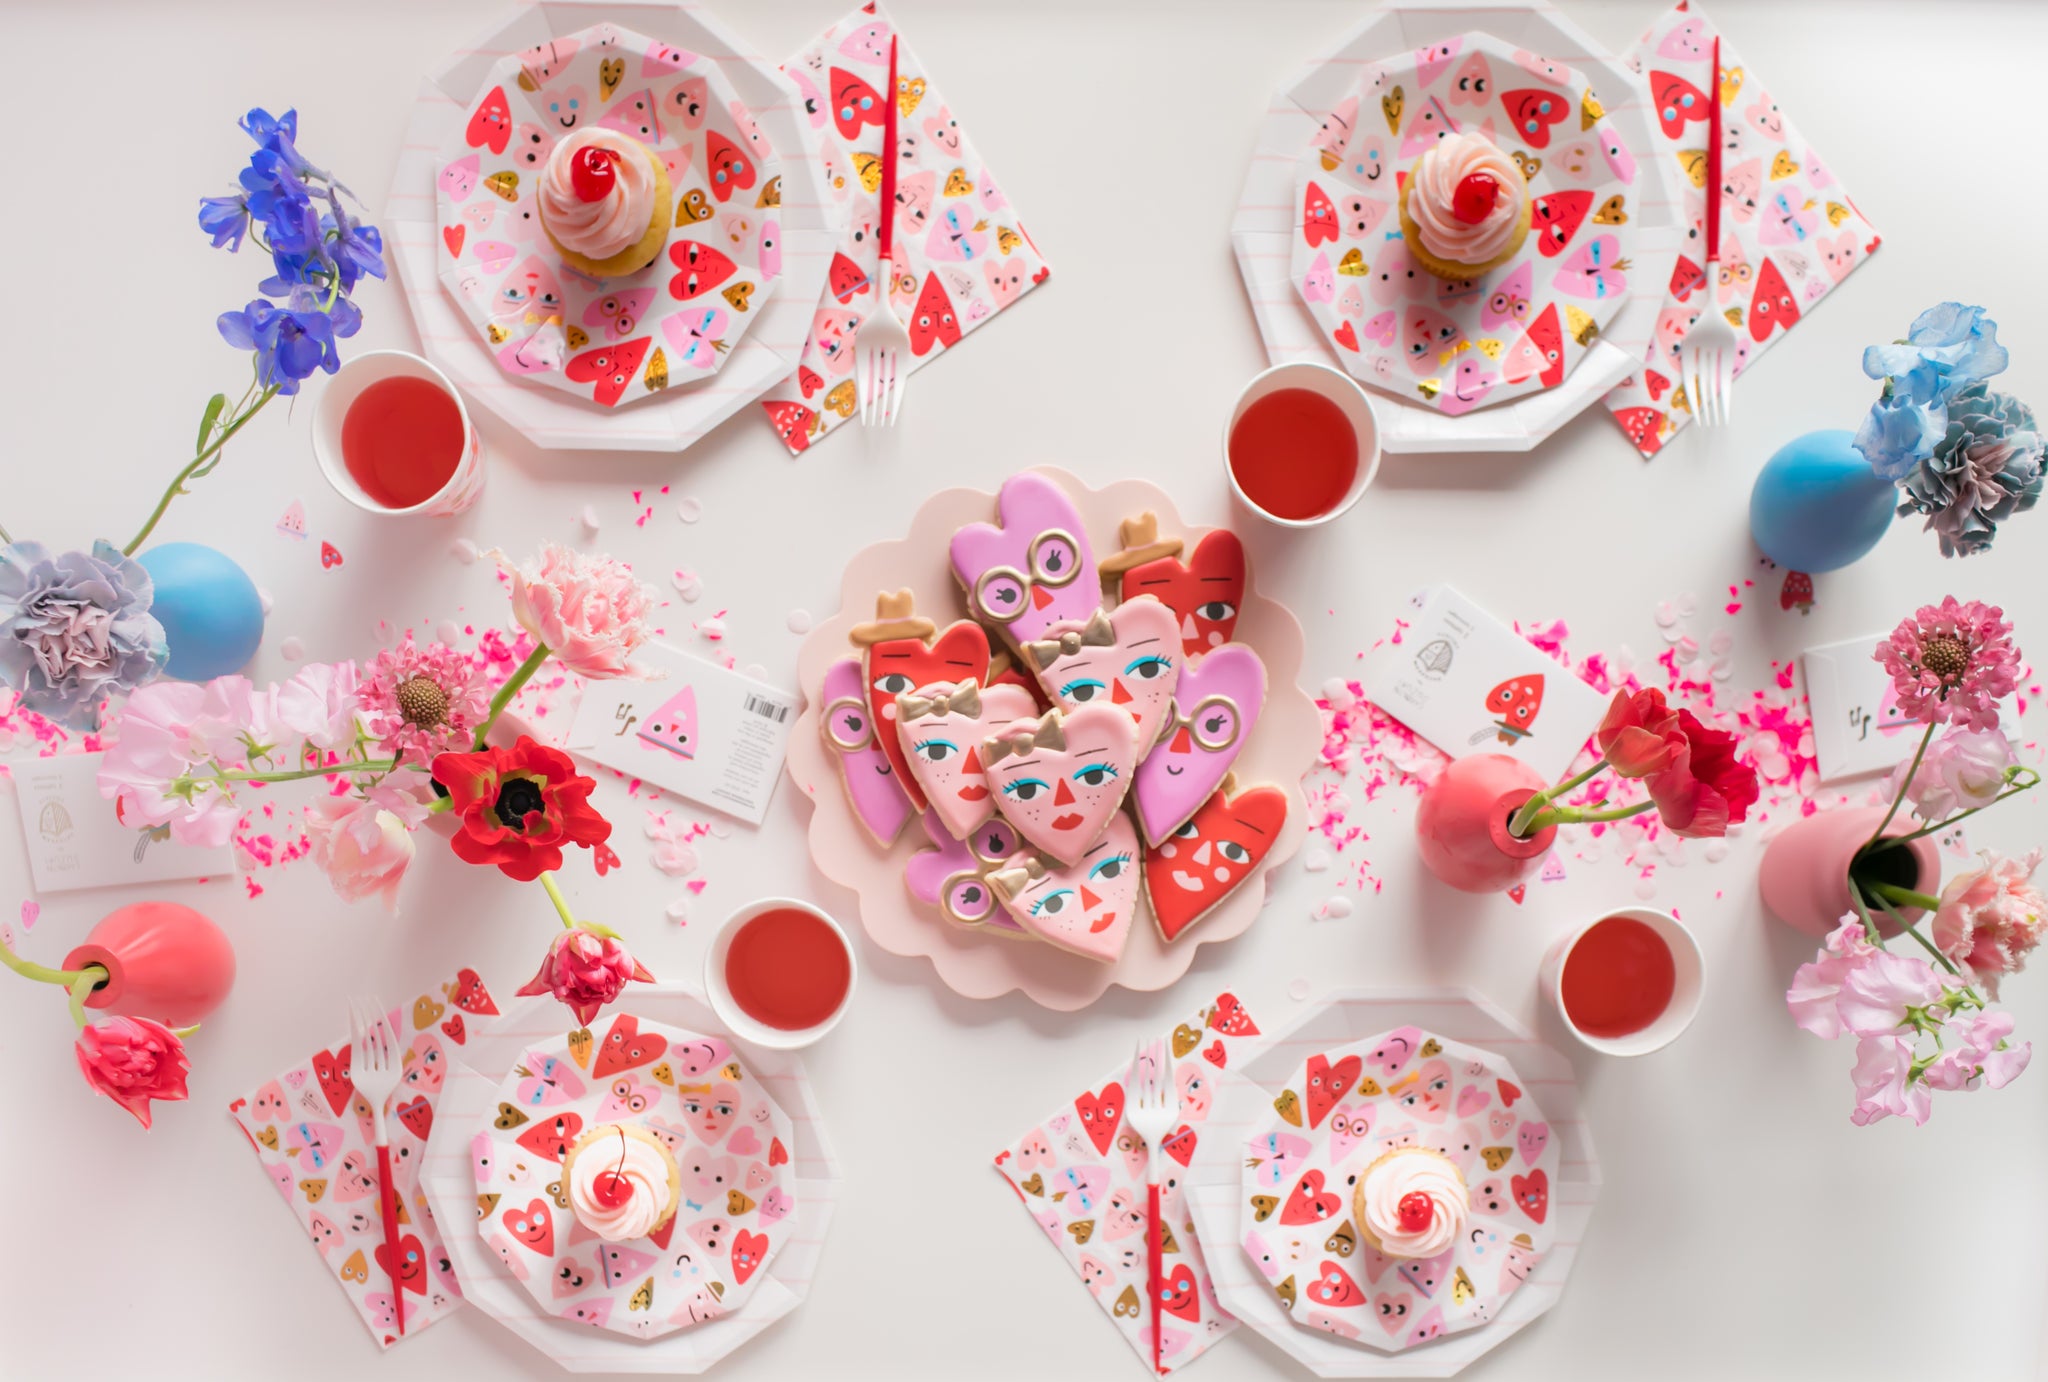 Heart shaped tableware and party supplies for Valentine's Day party